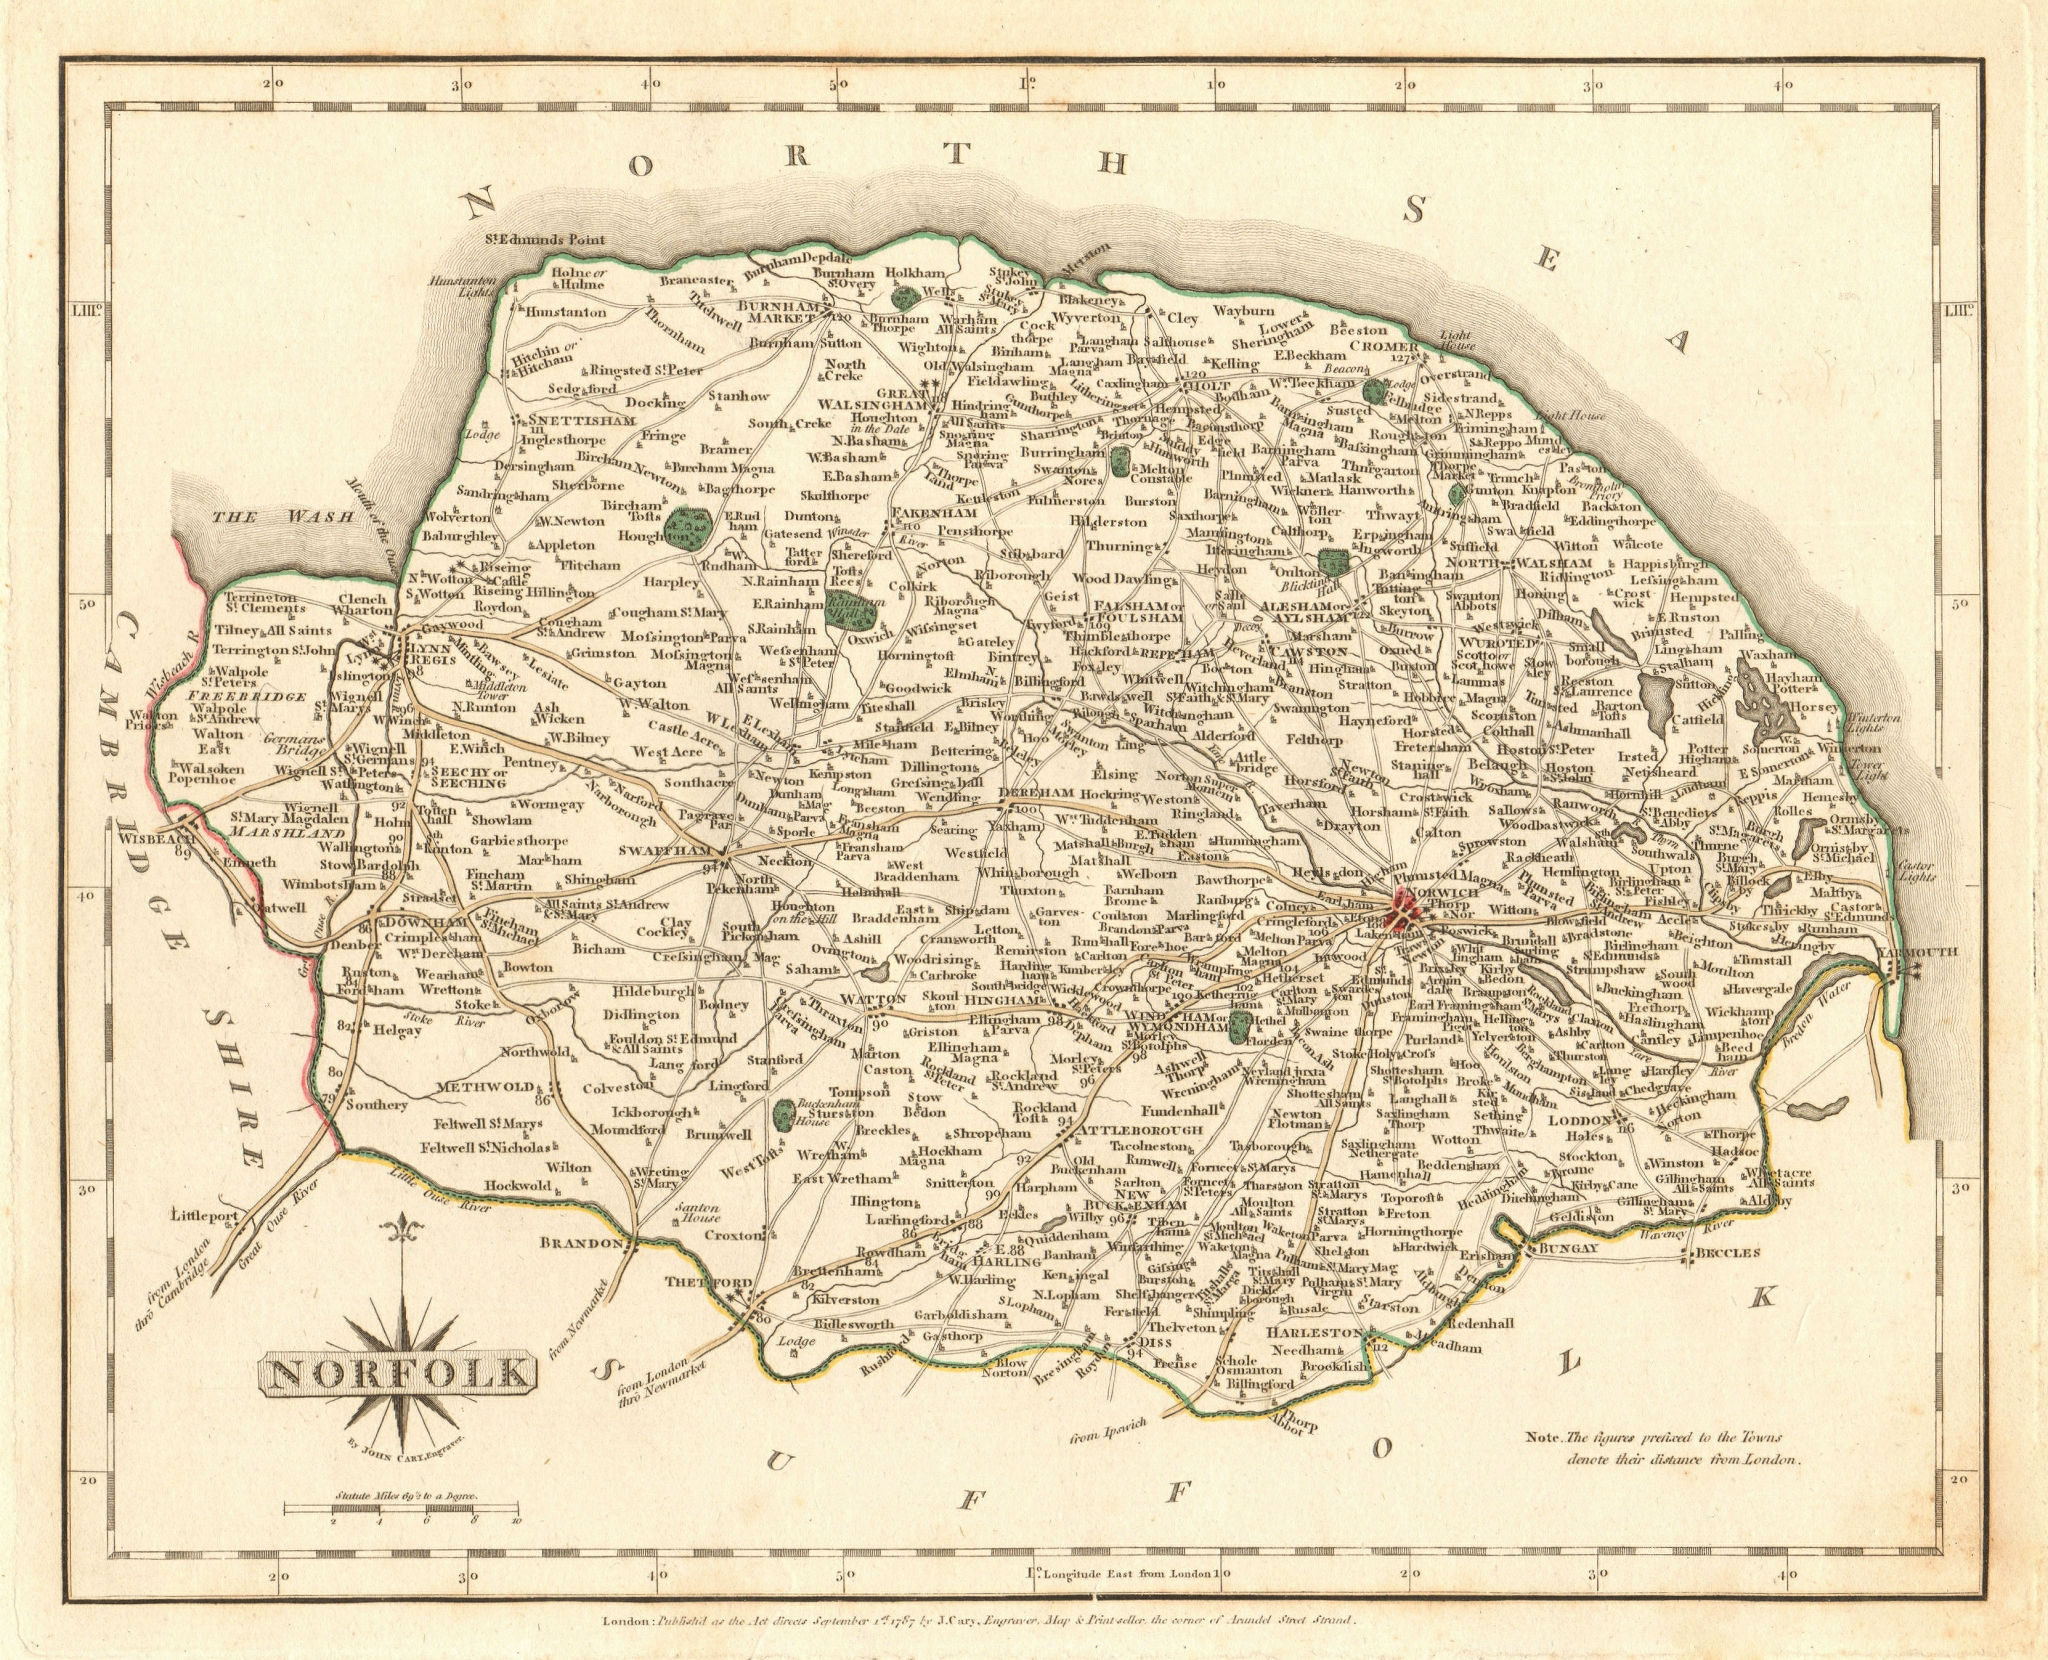 Antique county map of NORFOLK by JOHN CARY. Original outline colour 1787